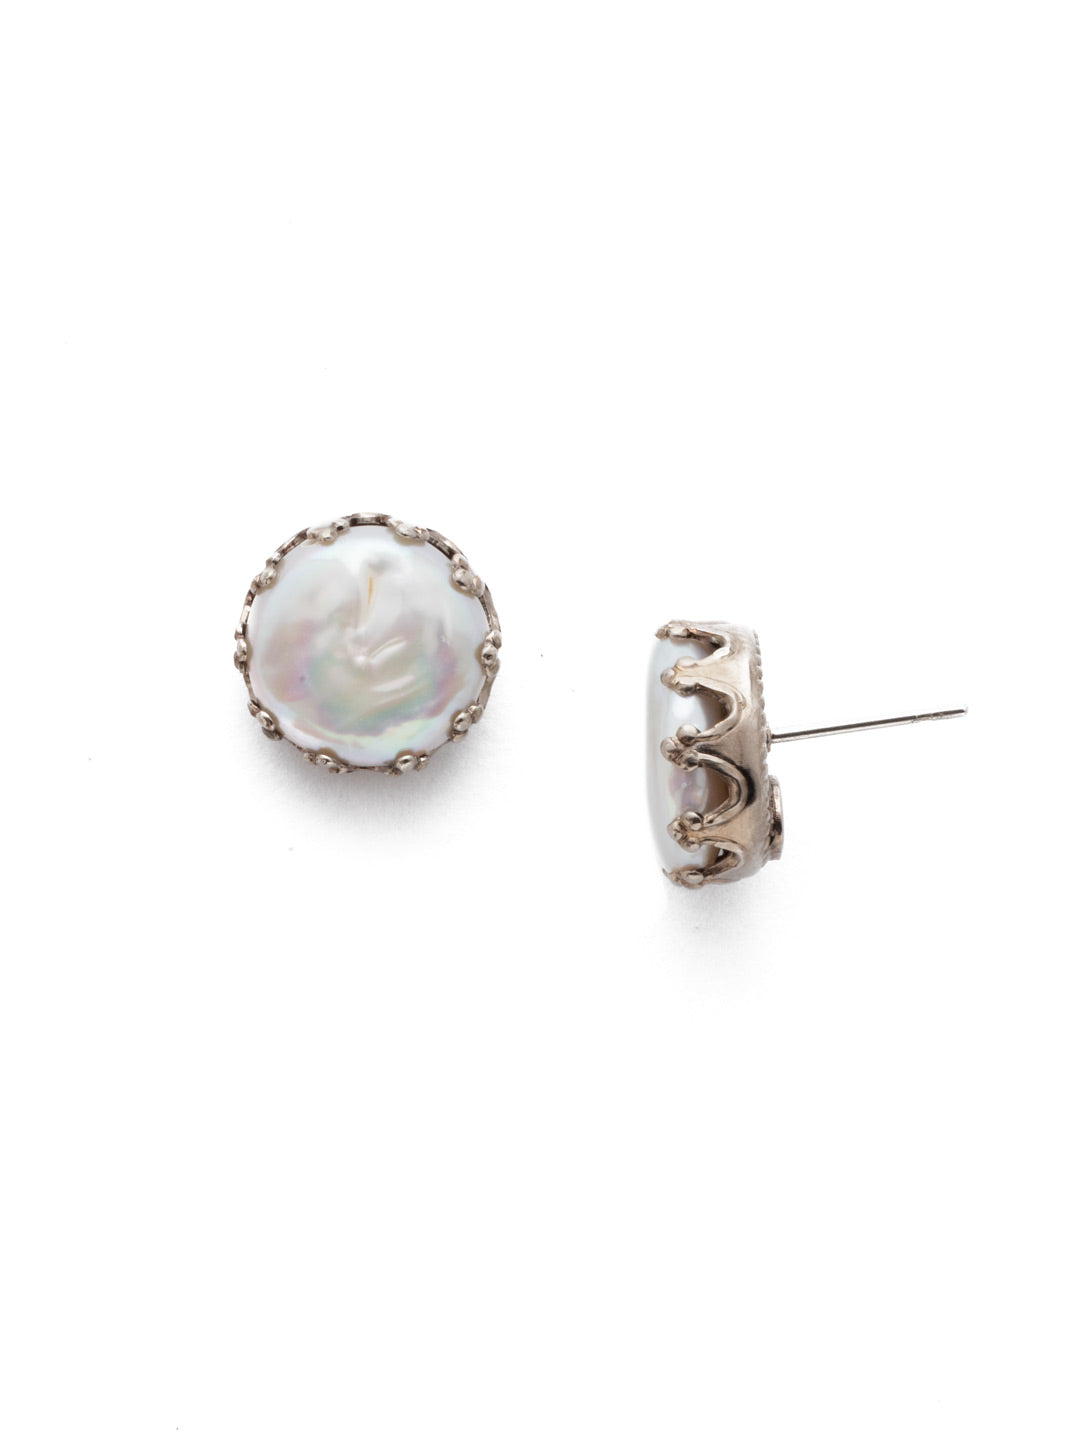 Isabella Stud Earrings - EEC15ASPLP - <p>Cute as a button! These post earrings feature a circular button pearl inside a decorative metal setting. From Sorrelli's Polished Pearl collection in our Antique Silver-tone finish.</p>